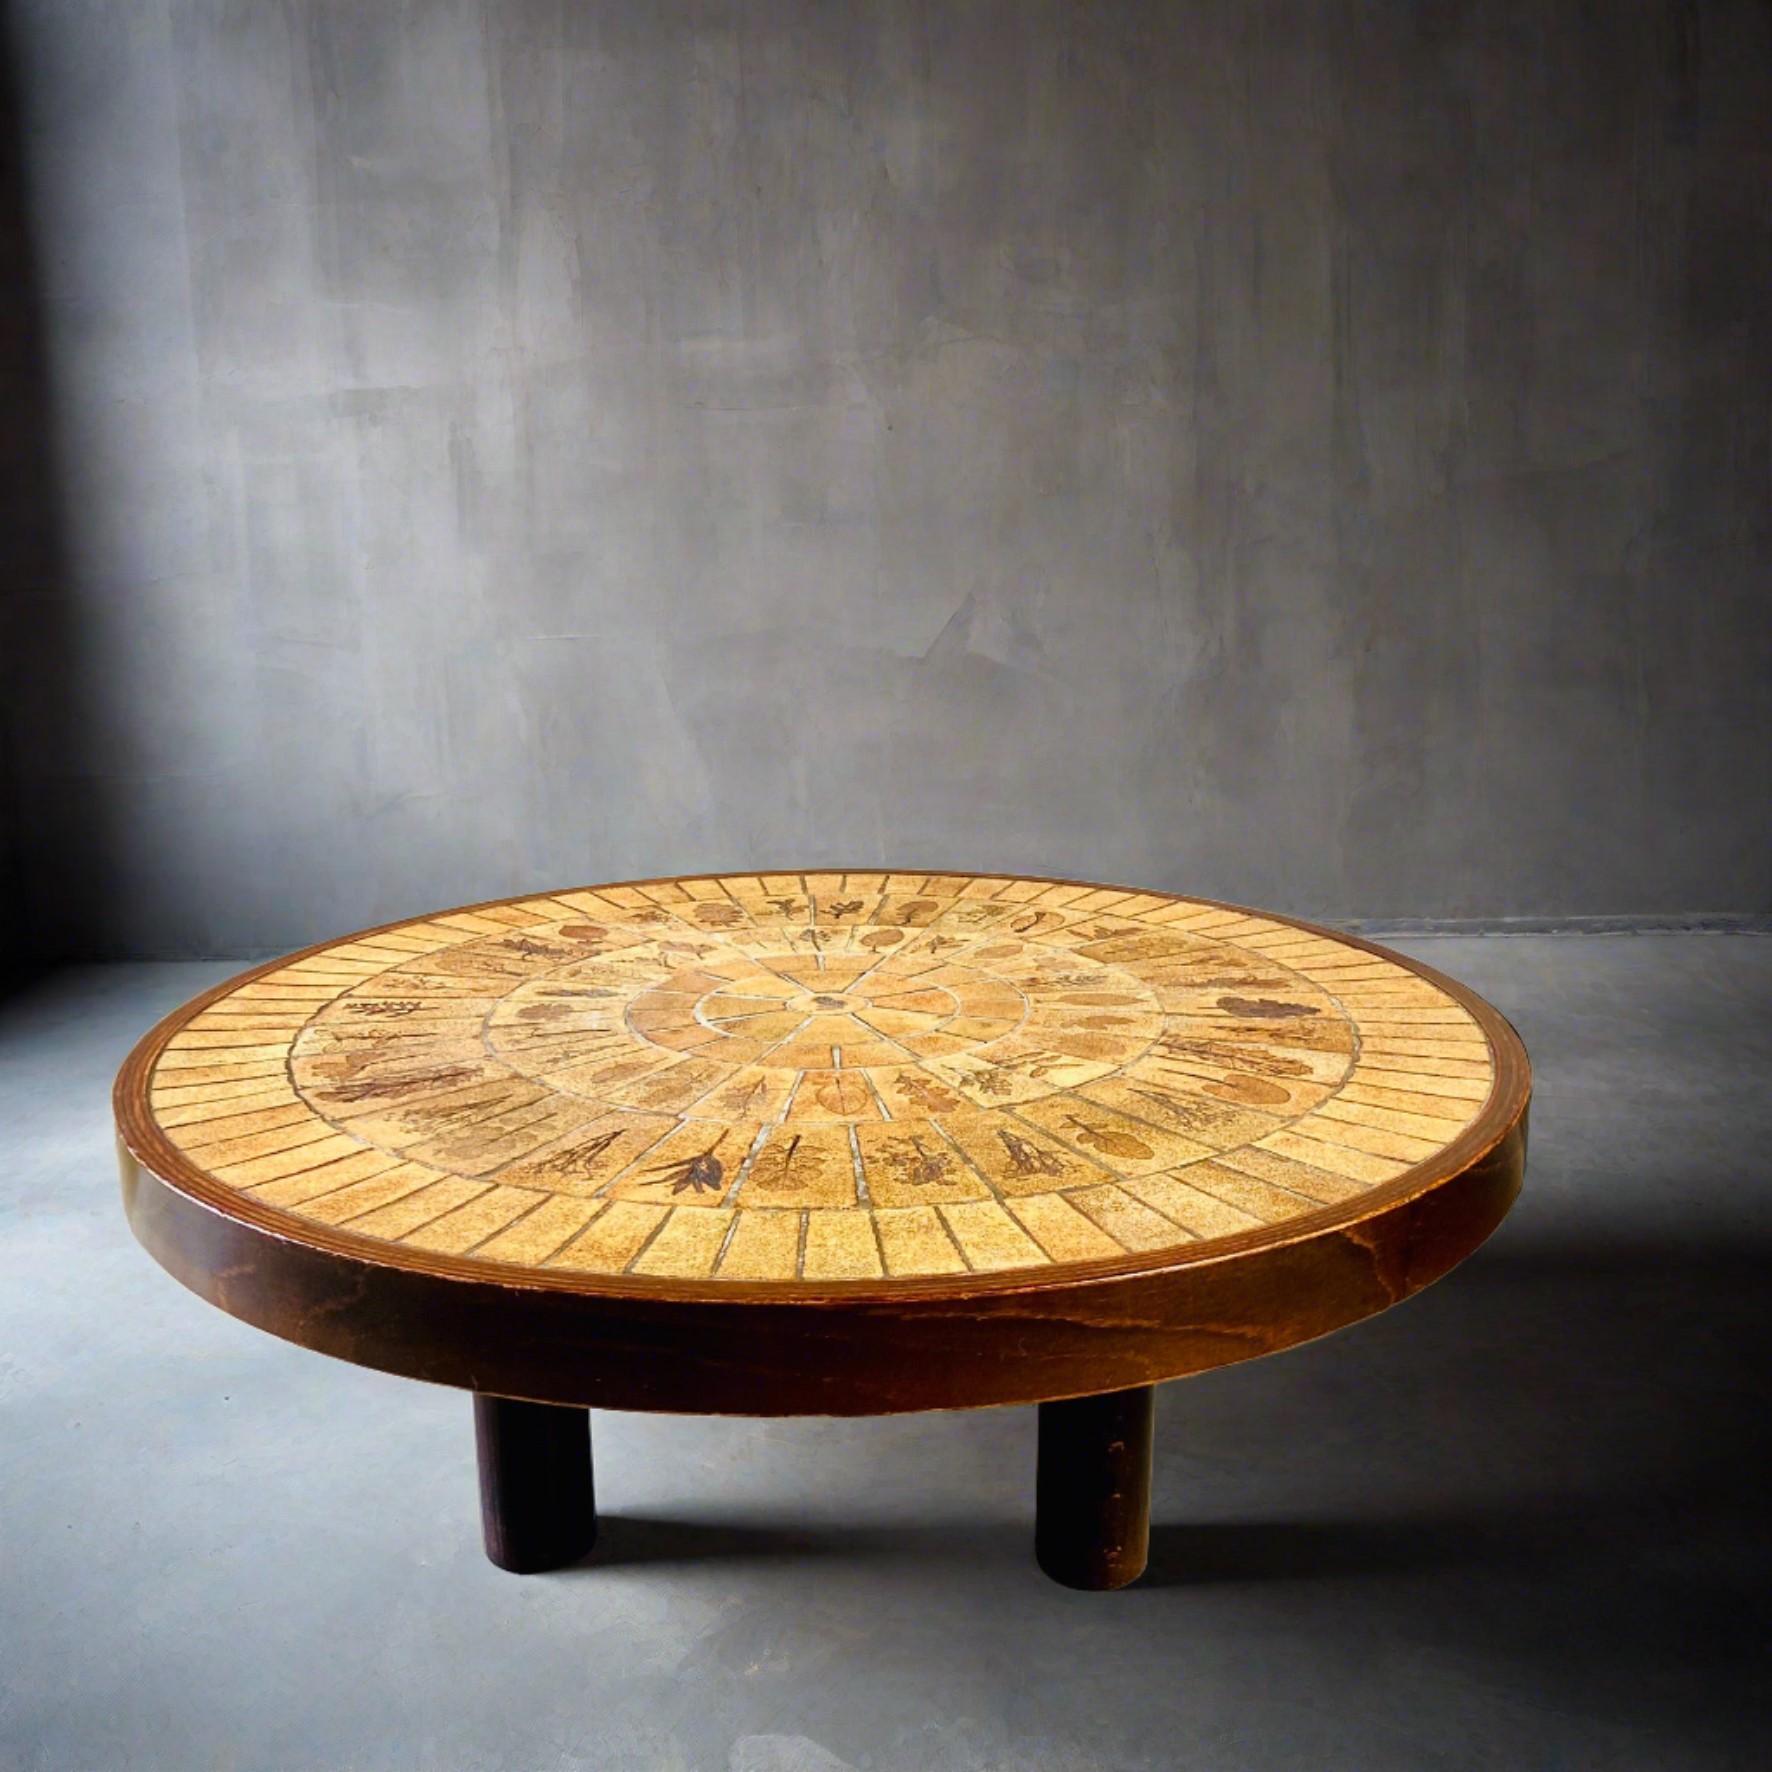 French Round Brutalist Ceramic Coffee Table by Roger Capron, France 1960 For Sale